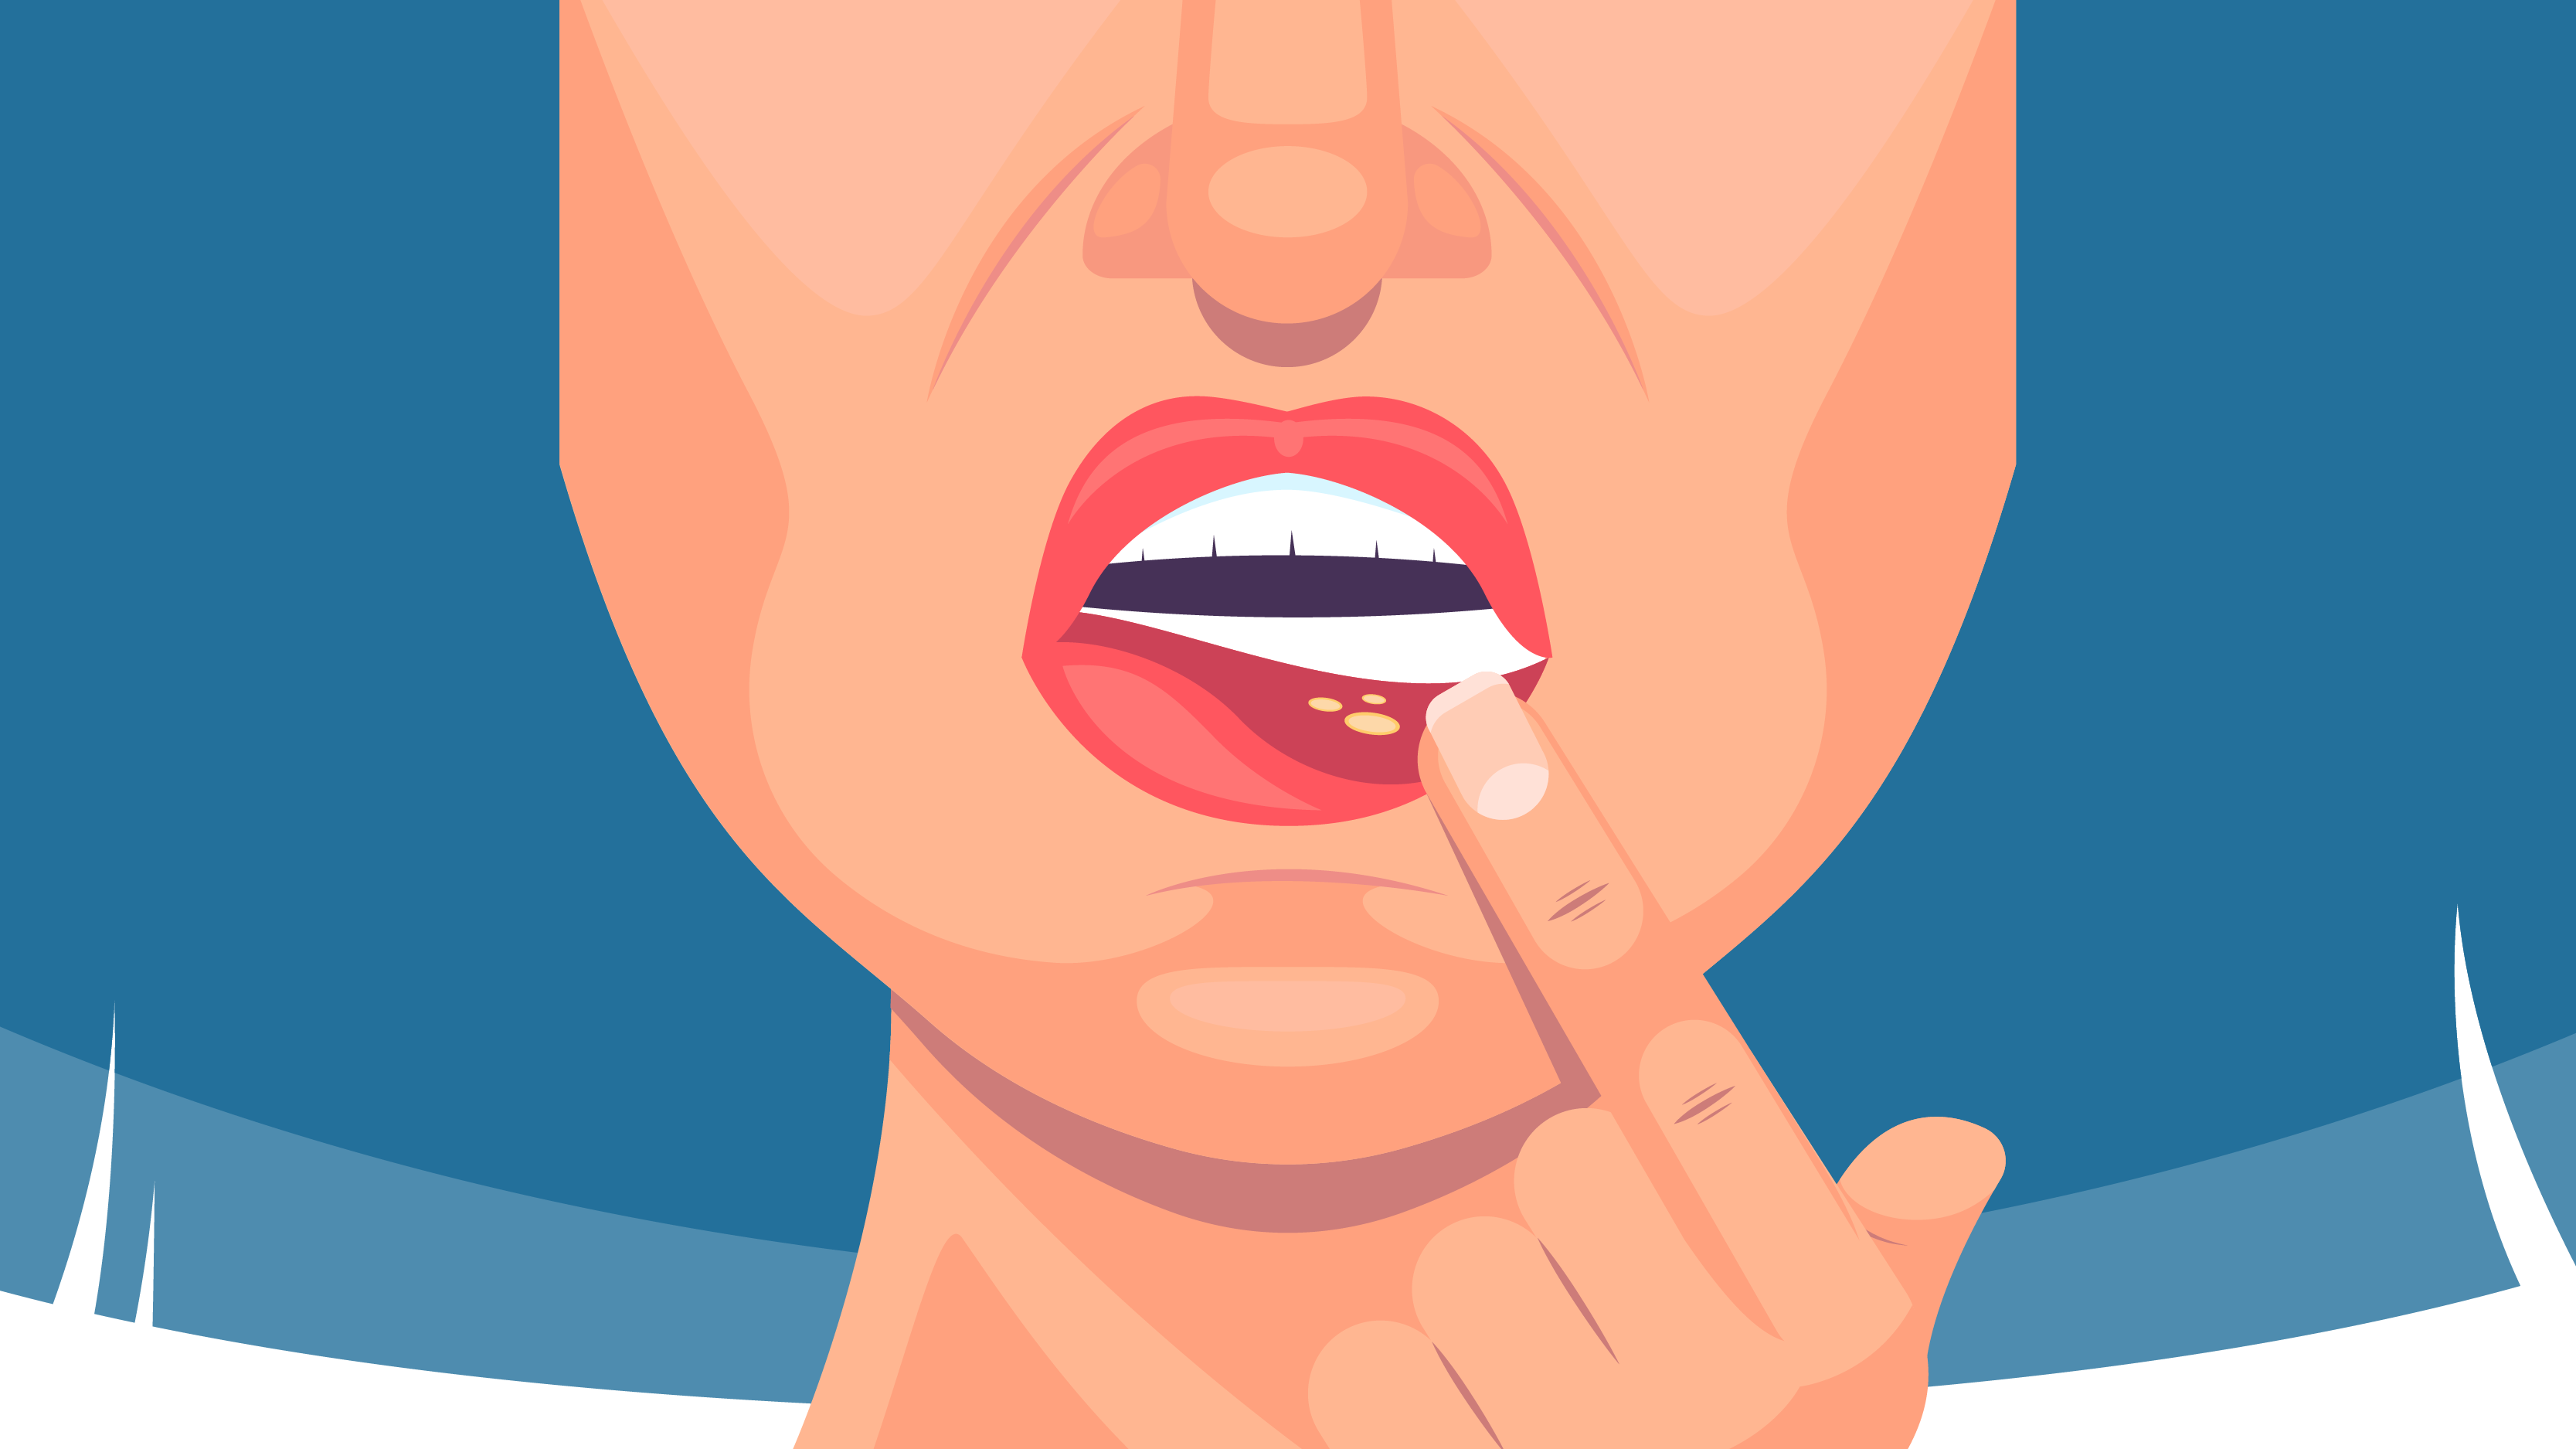 Mouth Ulcers can result from infections. Children and certain people with herpes simplex frequently develop mouth ulcers.